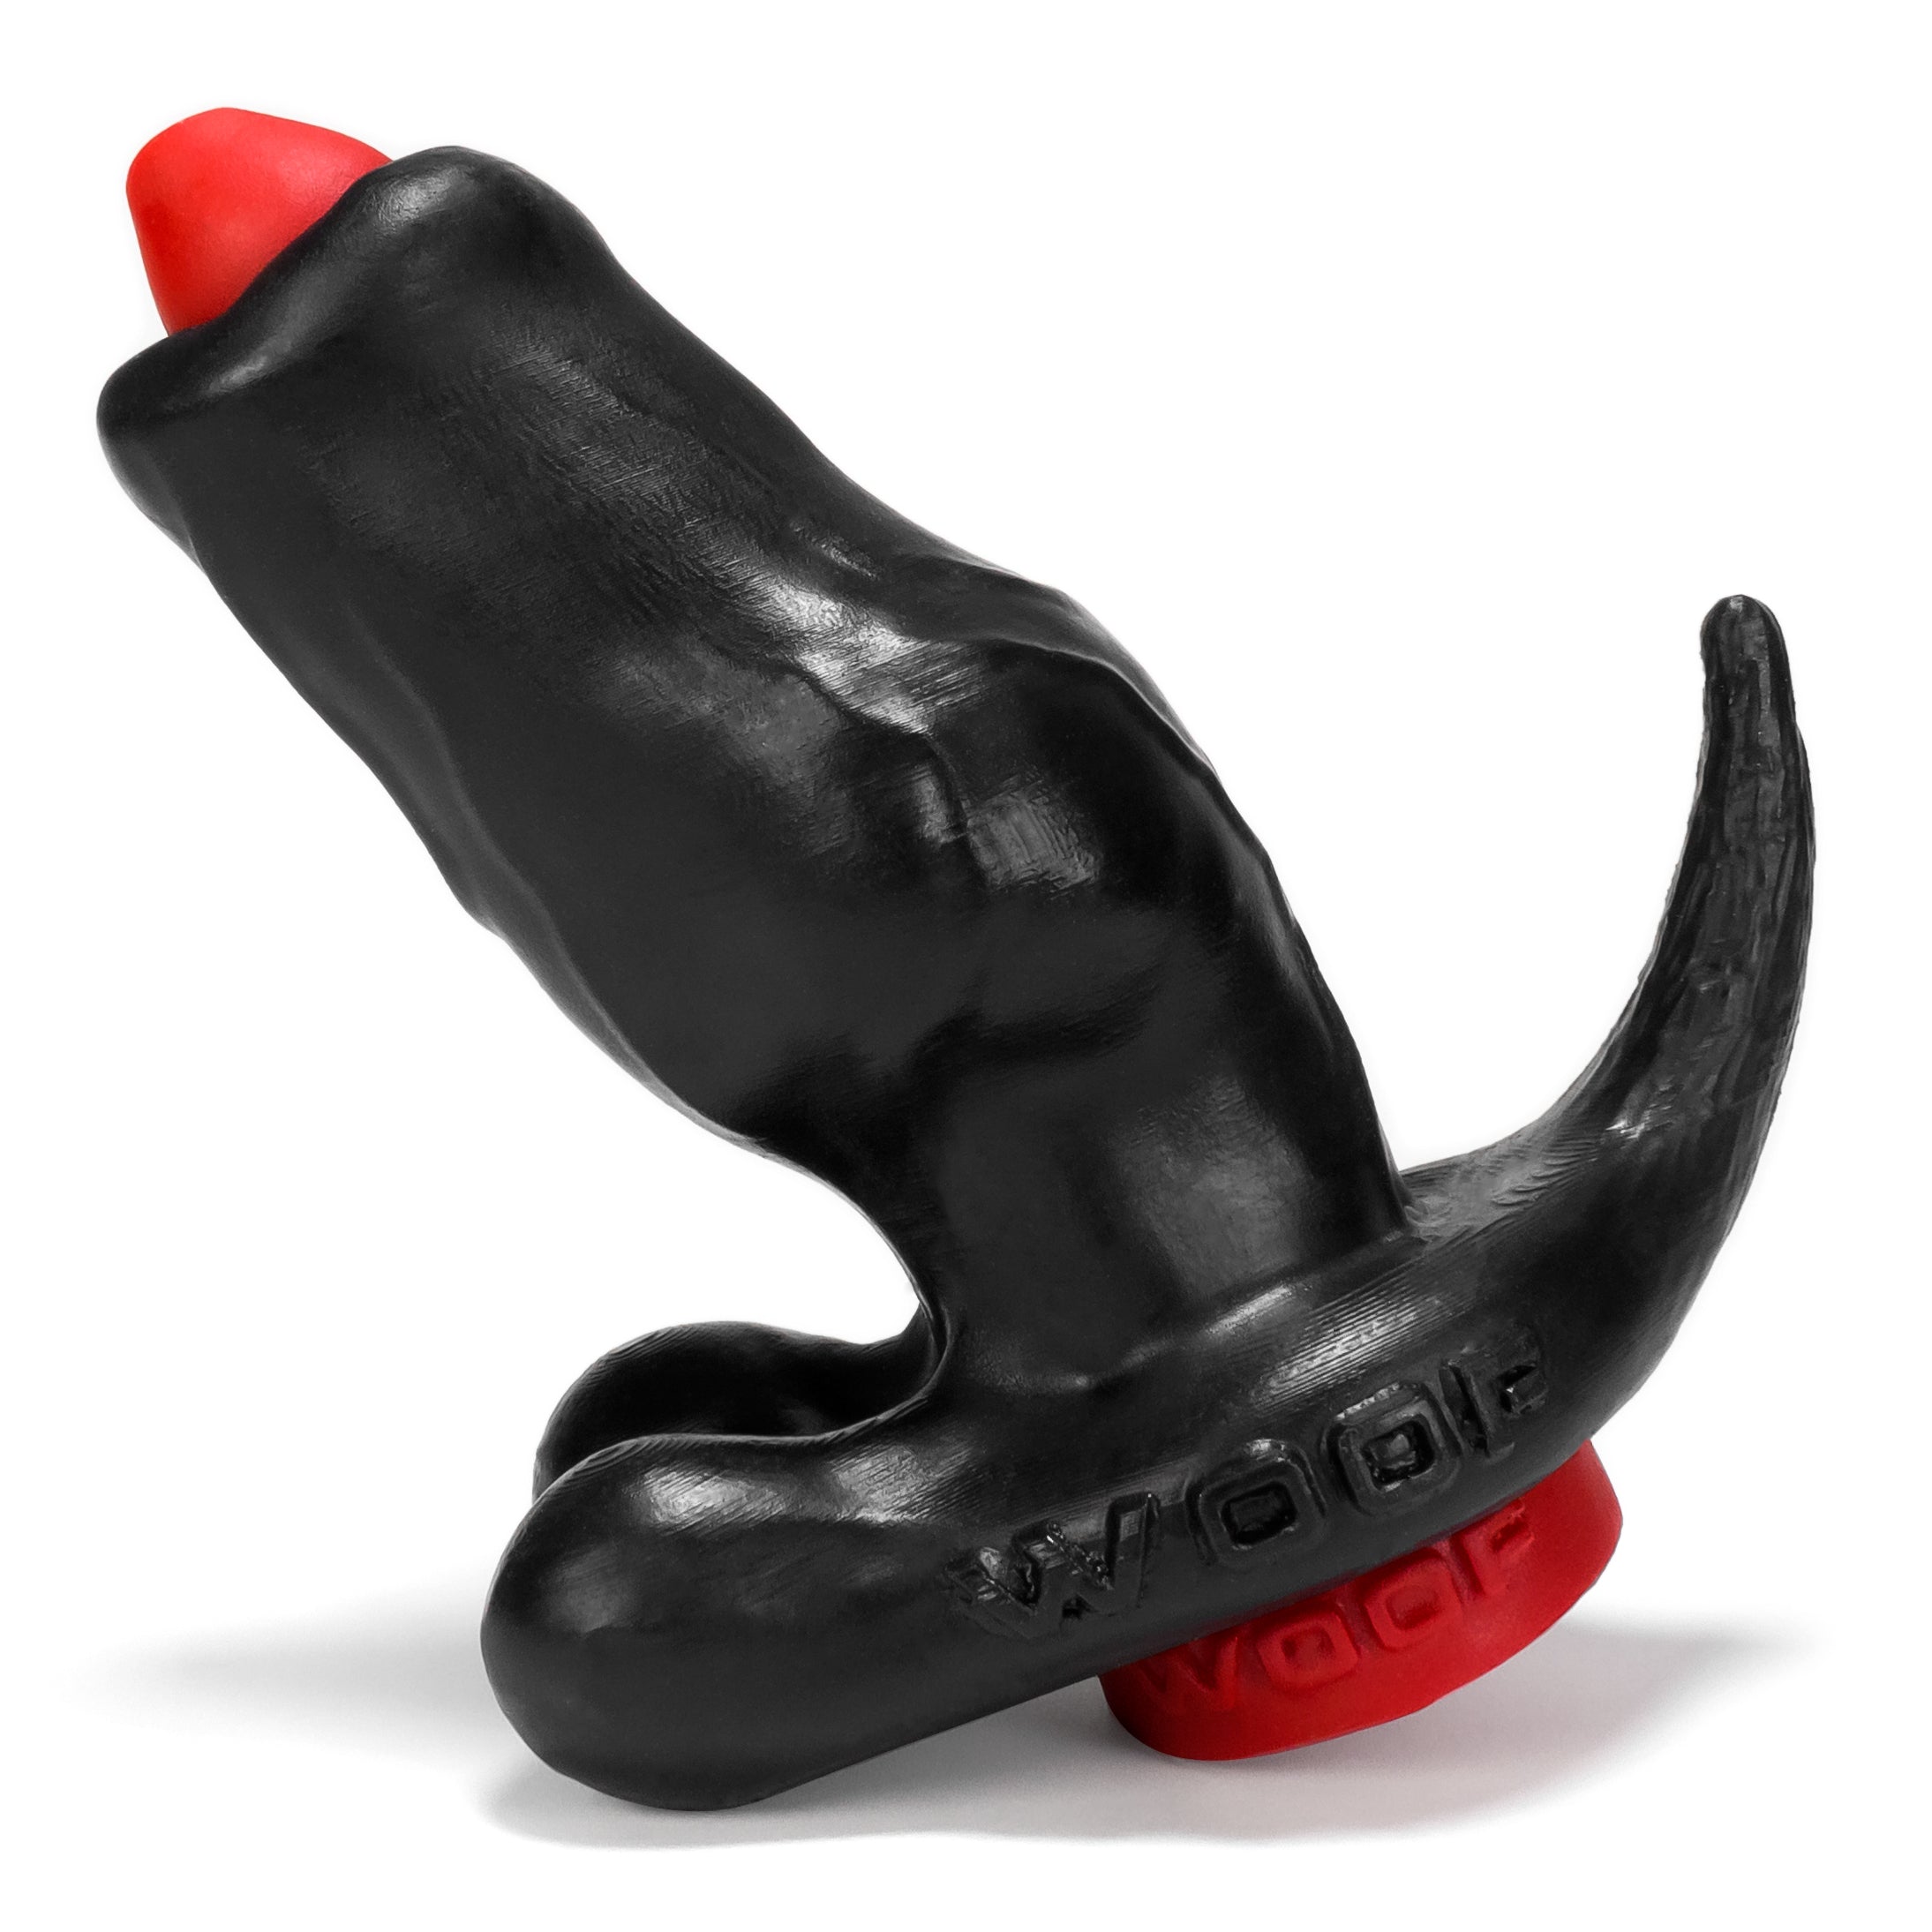 Woof Hollow Plug W/Stopper Black/Red